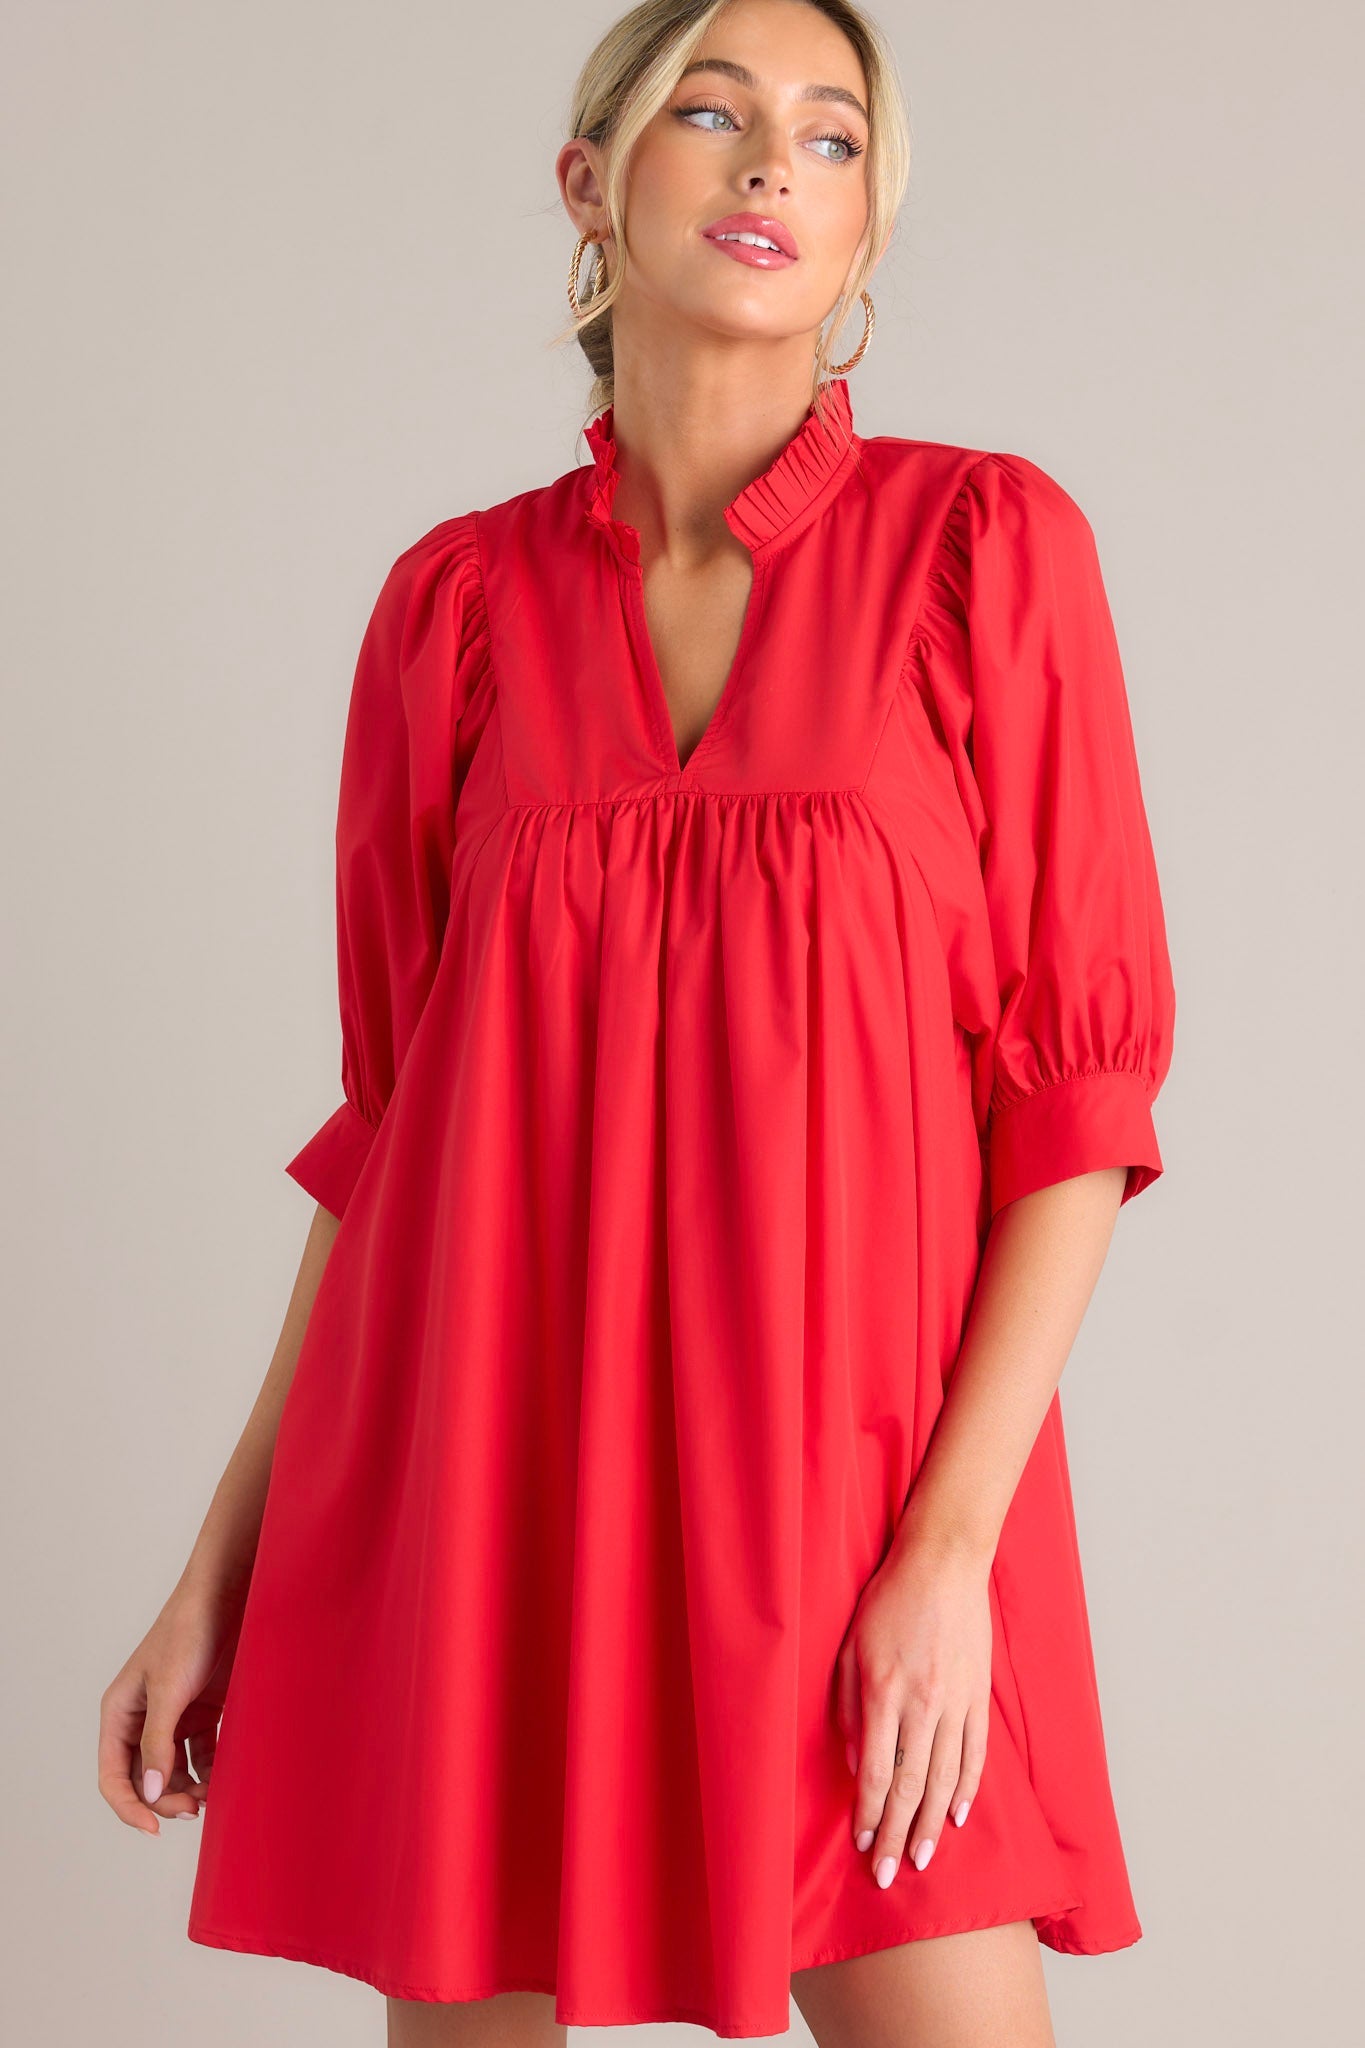 Angled front view of this red mini dress that features a v-neckline, a ruffled faux collar, pleated detailing around the bust, functional hip pockets, and cuffed puff sleeves.